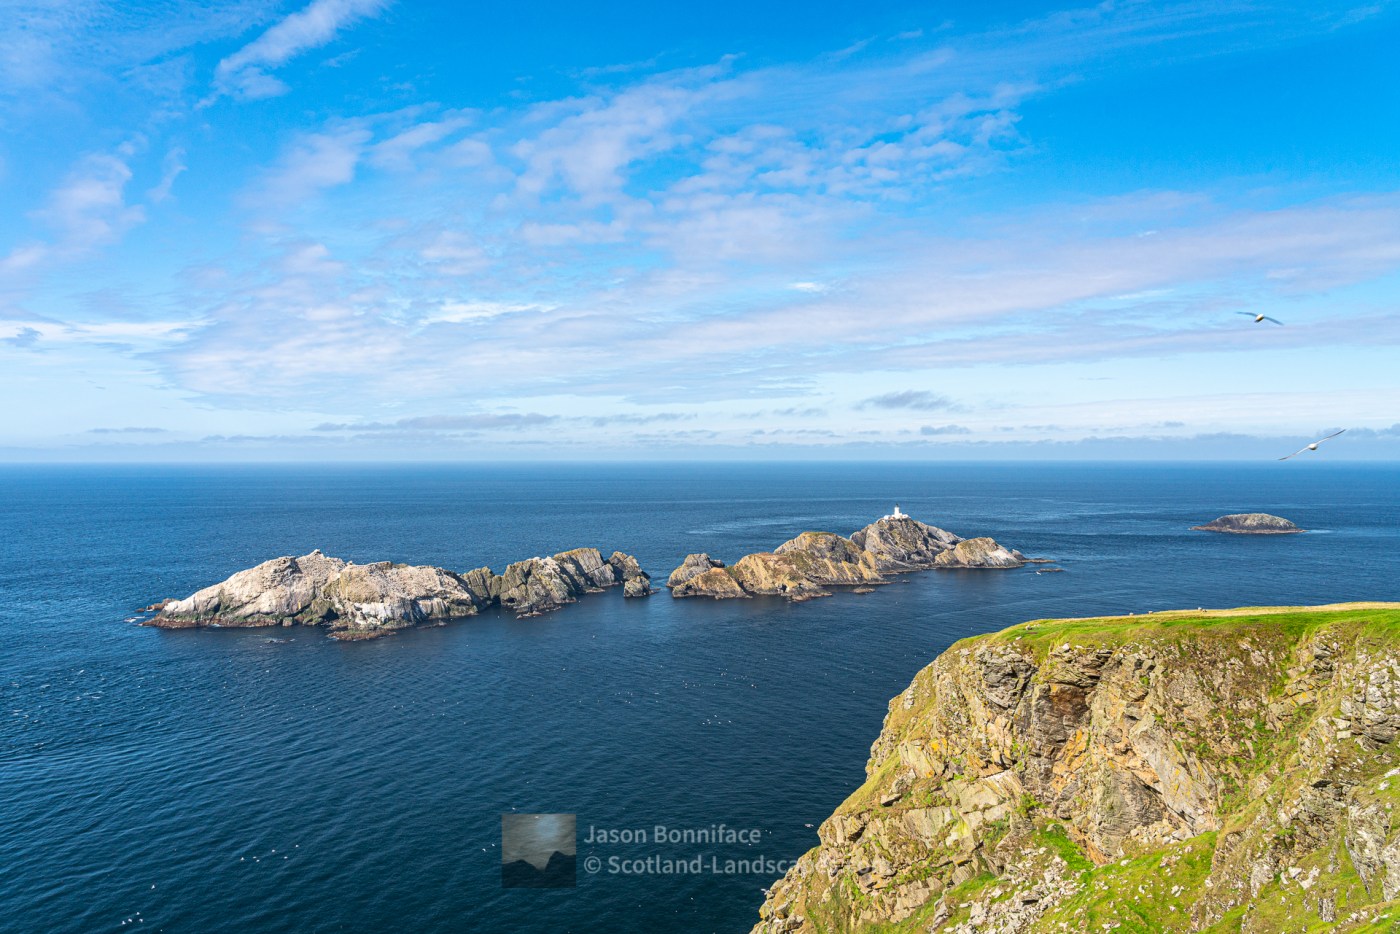 The Northern End of the British Isles - Muckle Flugga and Out Stack